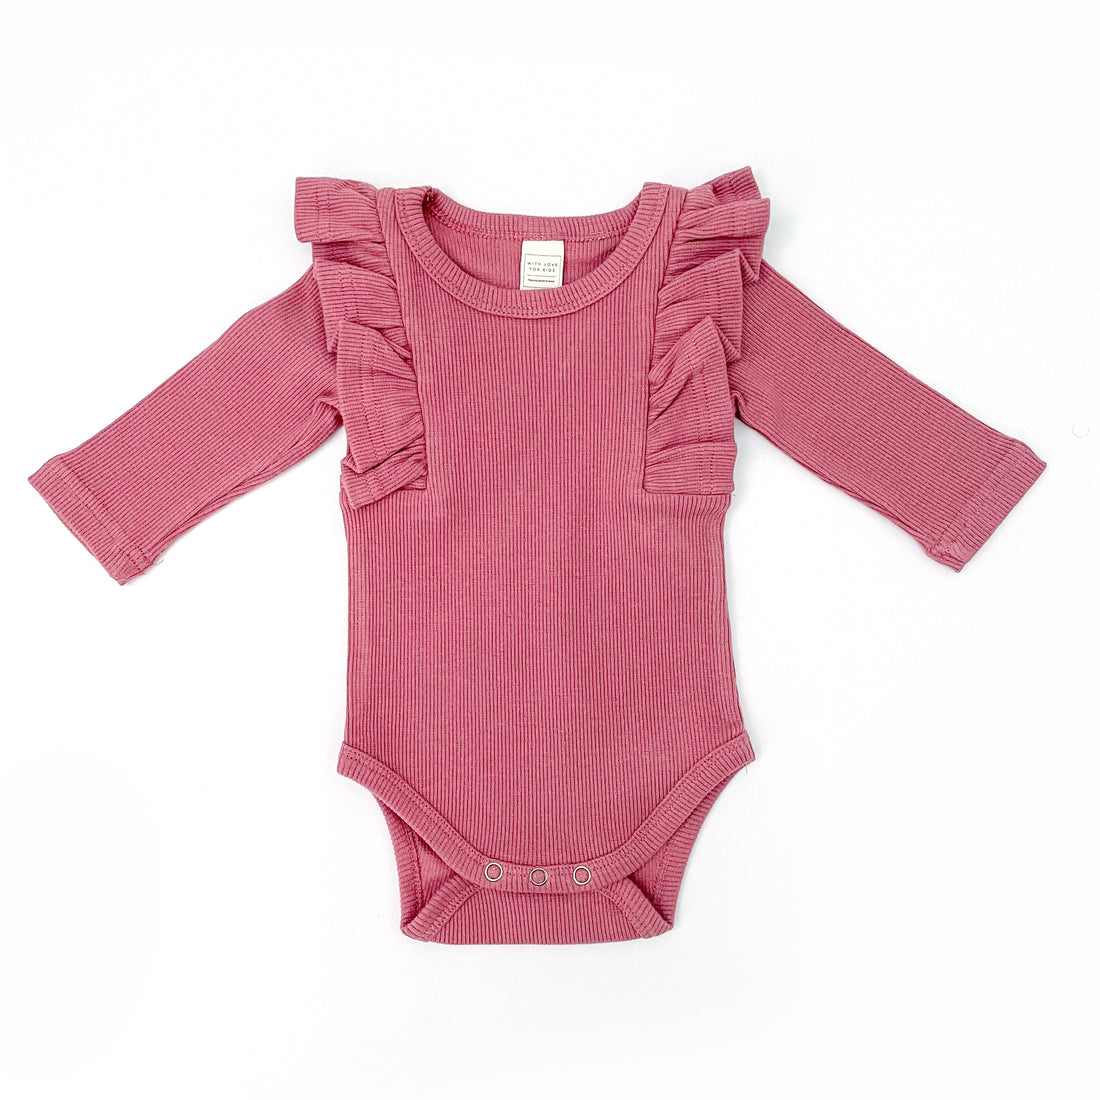 BASICS THICK Shimmy Ribbed Long Sleeve Onesie/Top - ROSEWOOD